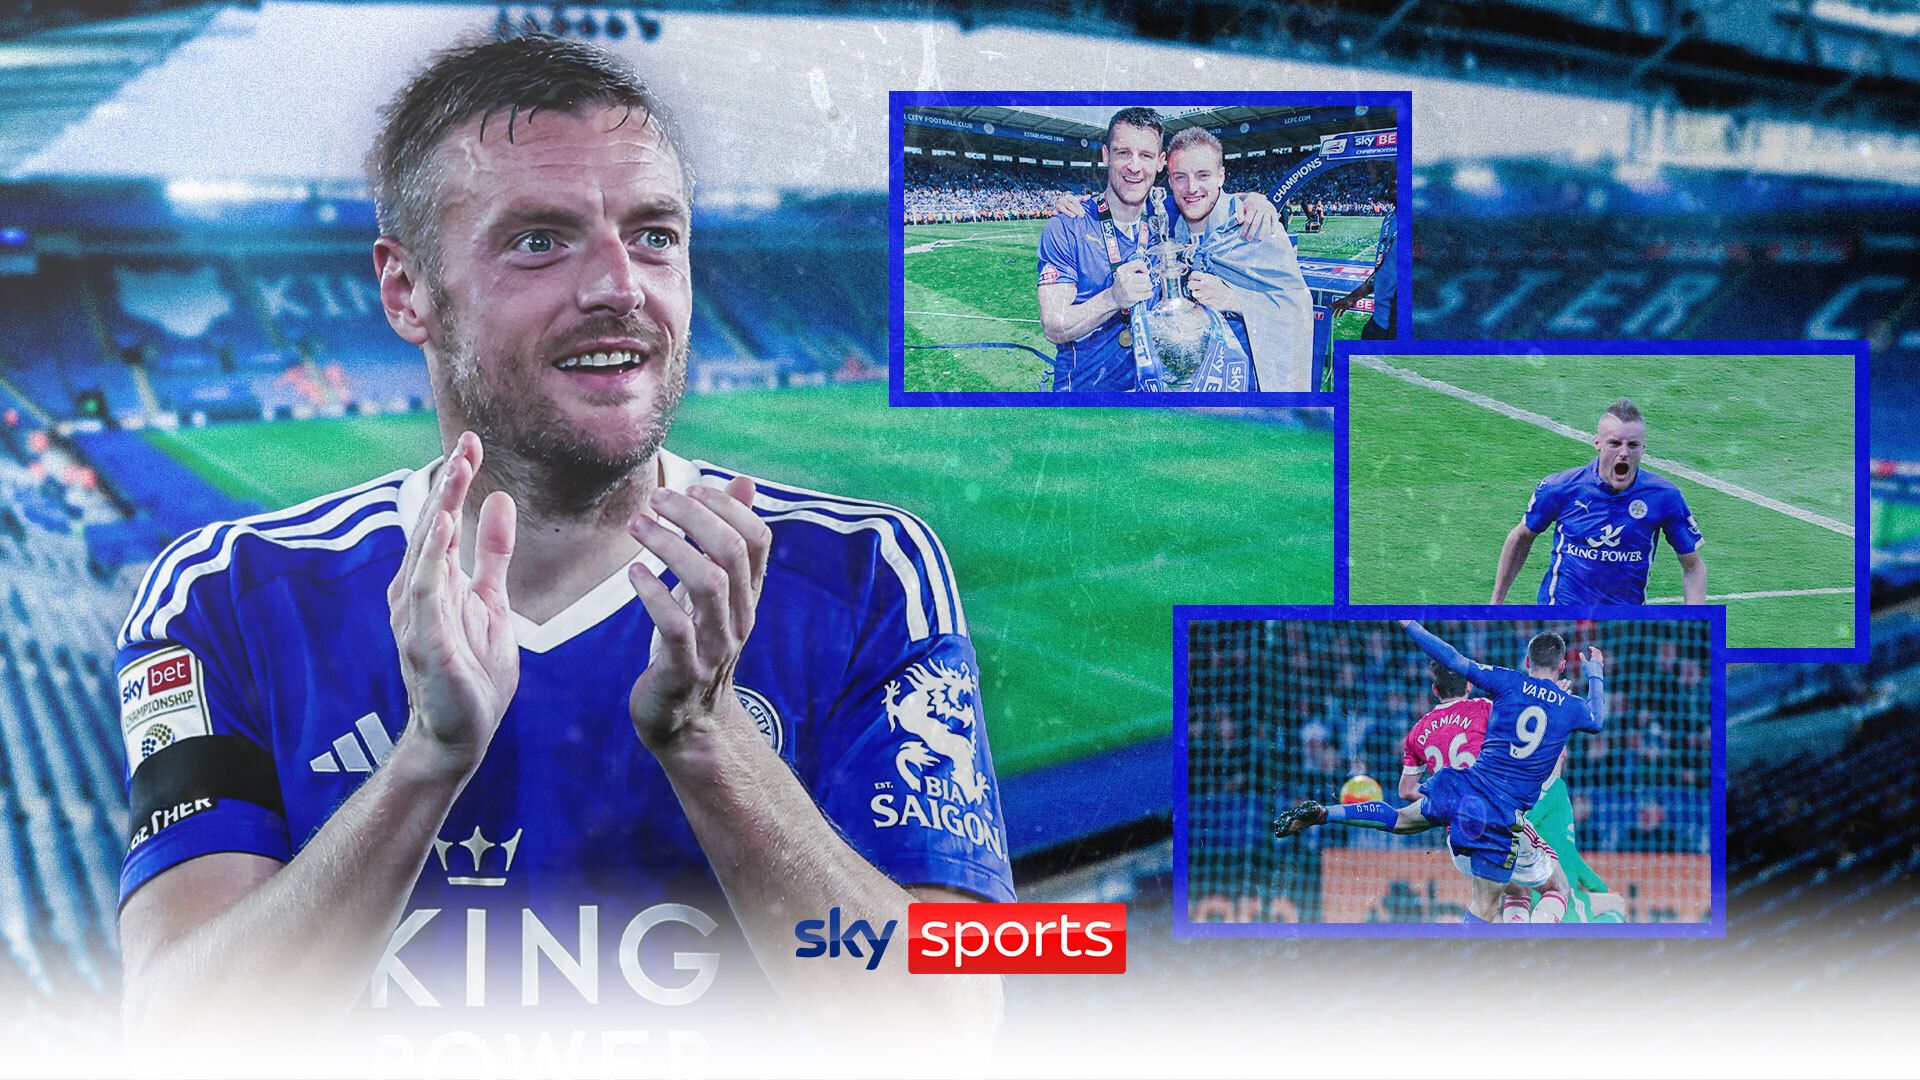 Vardy: The ups and downs of a decade at Leicester